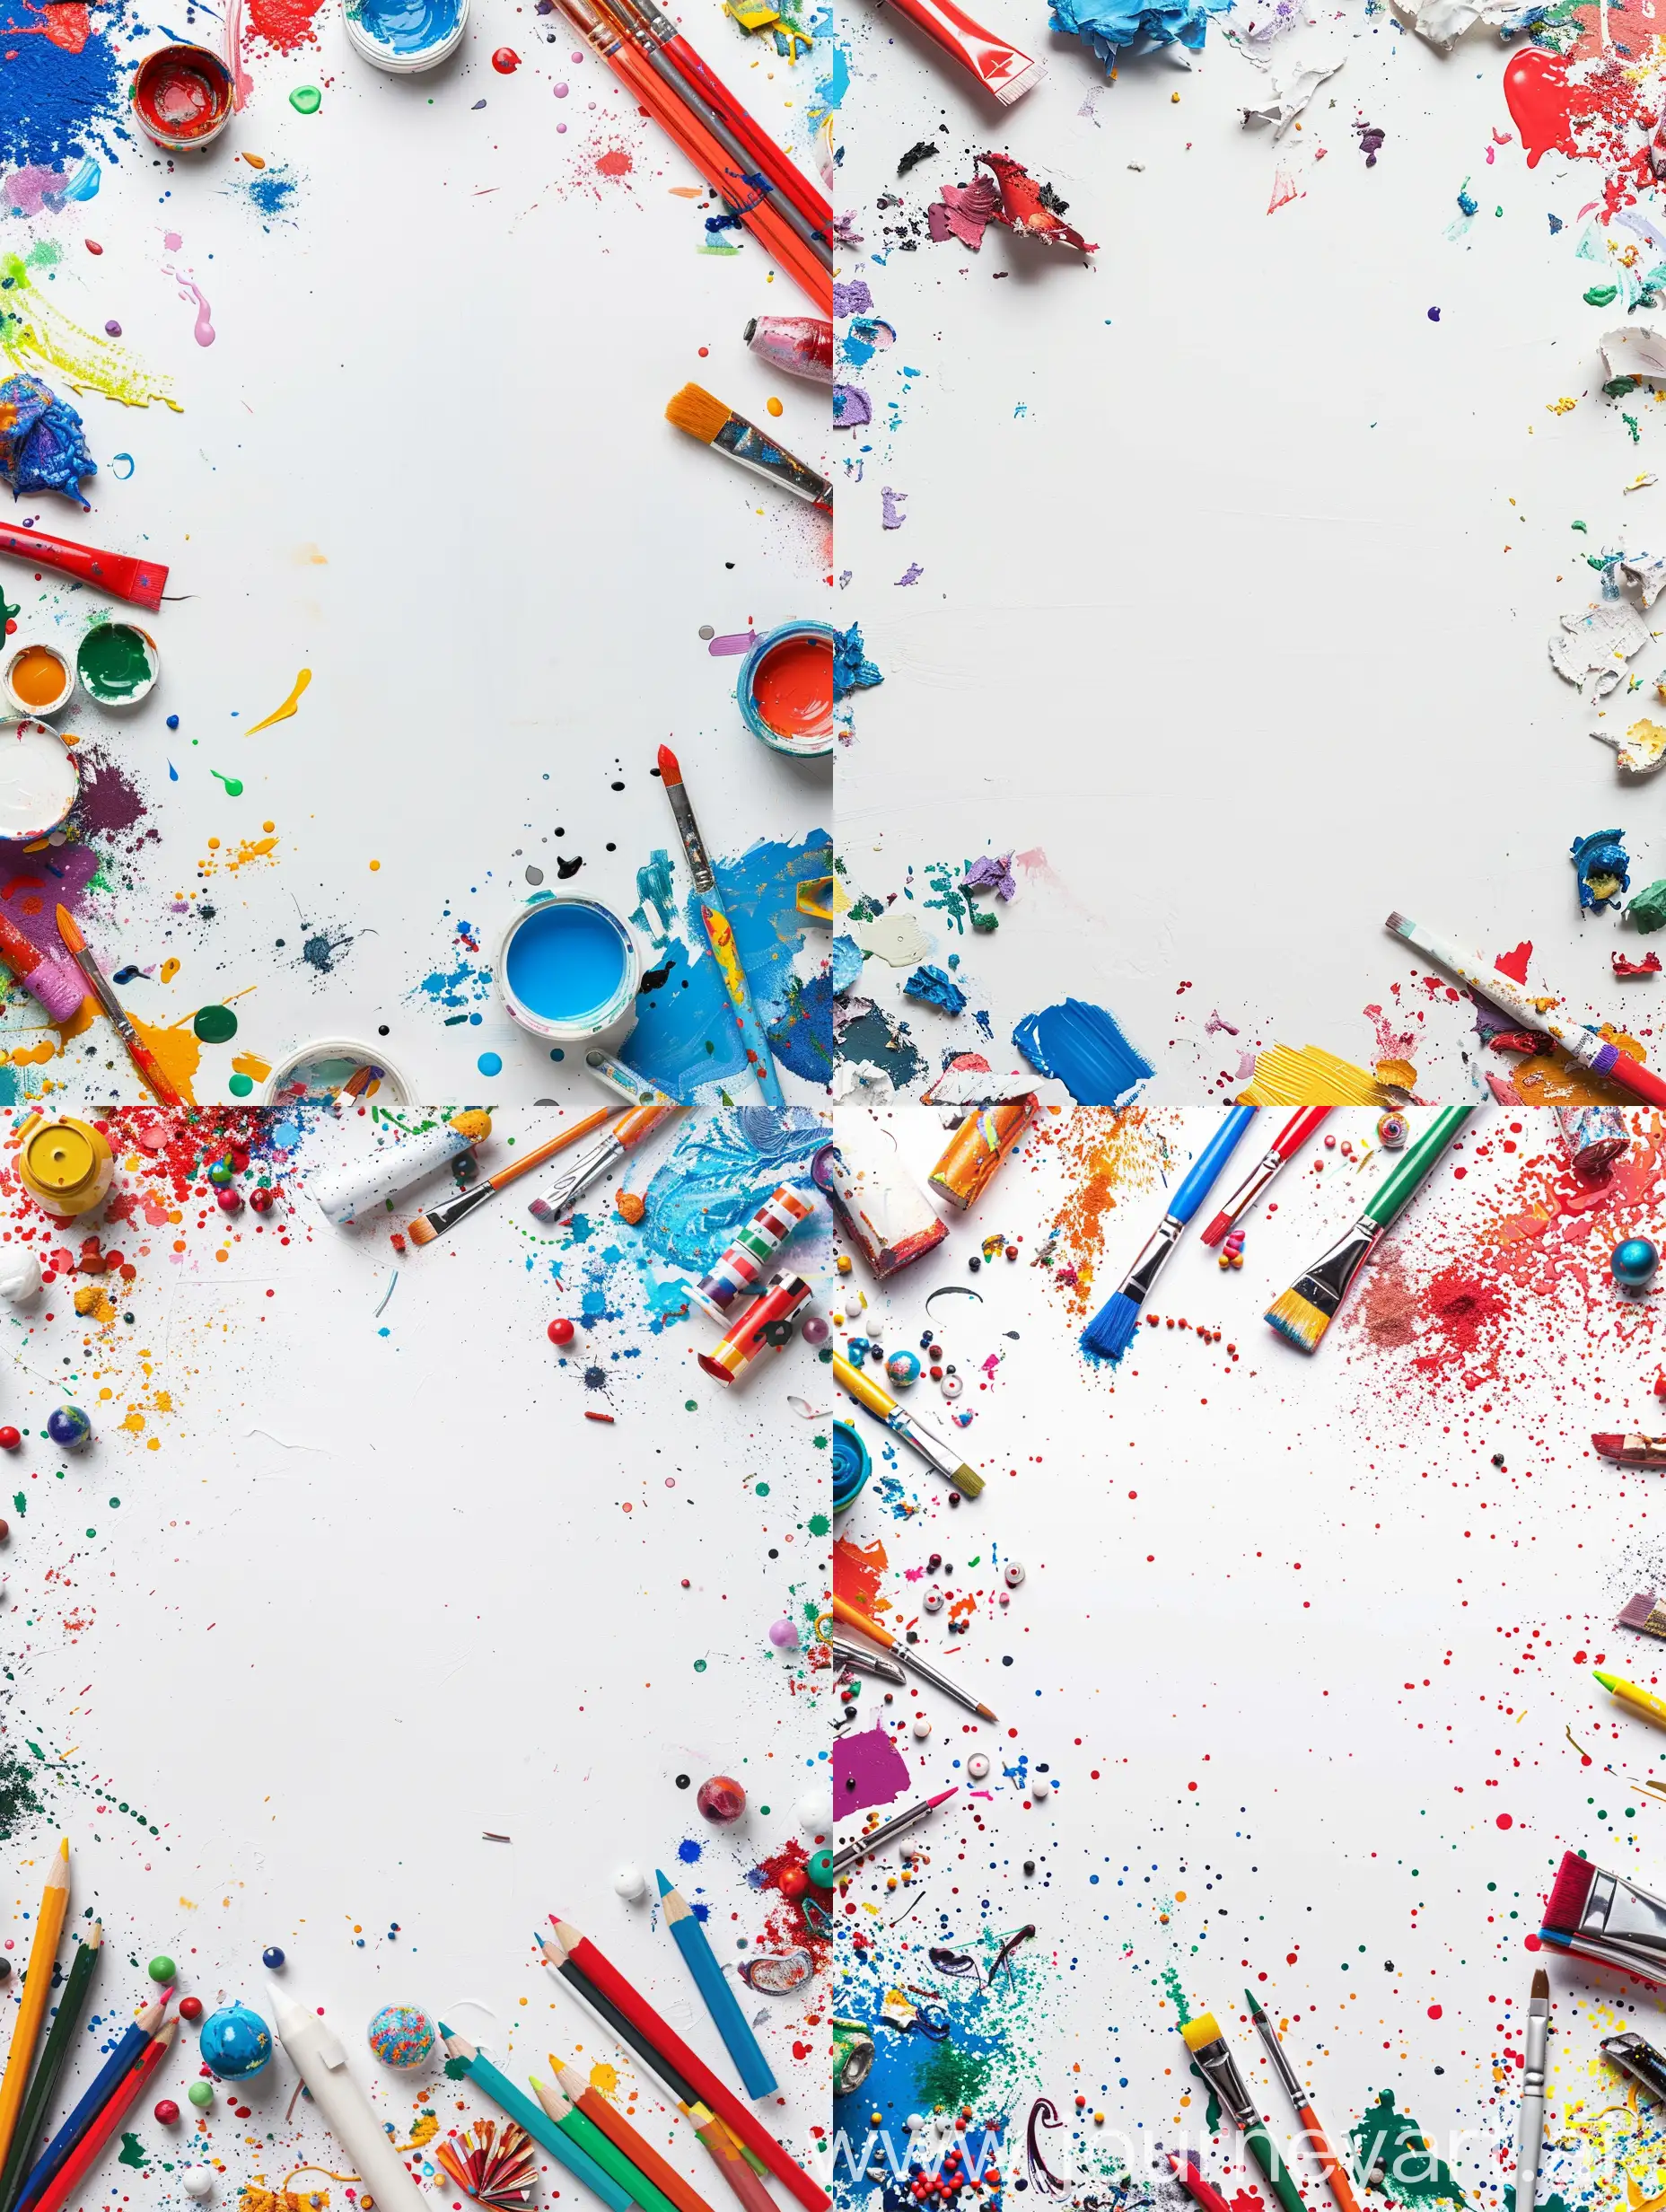 Color-Mixing-Game-Background-Artistic-Materials-Scattered-on-White-Surface